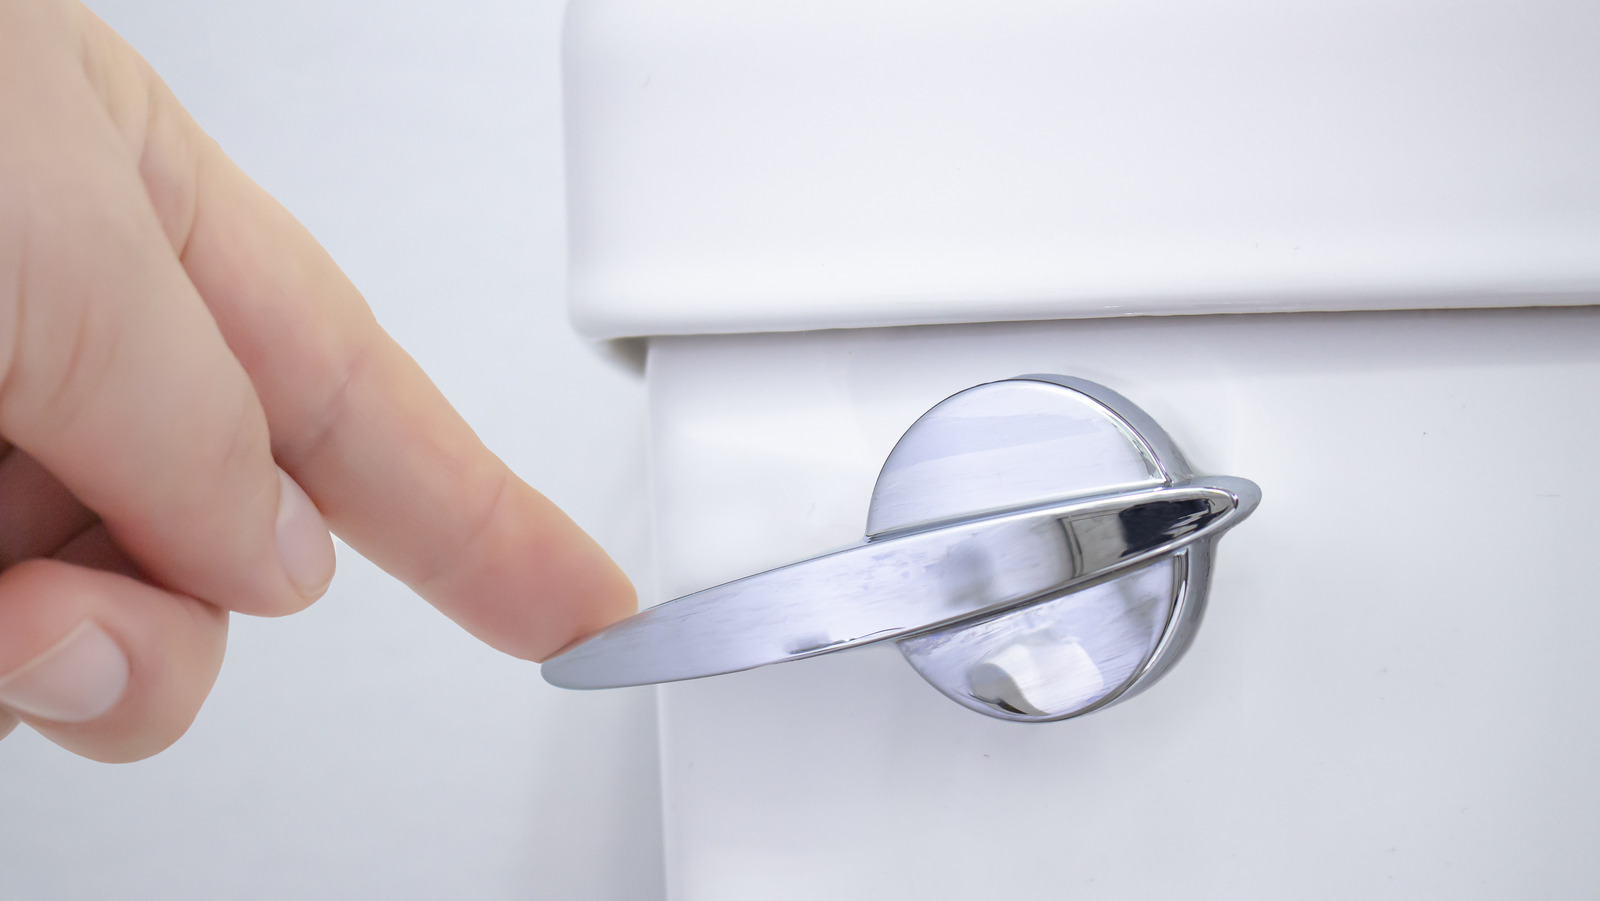 We Tried This Sweet Trick To Poop Instantly. Here's How It Went - Health Digest